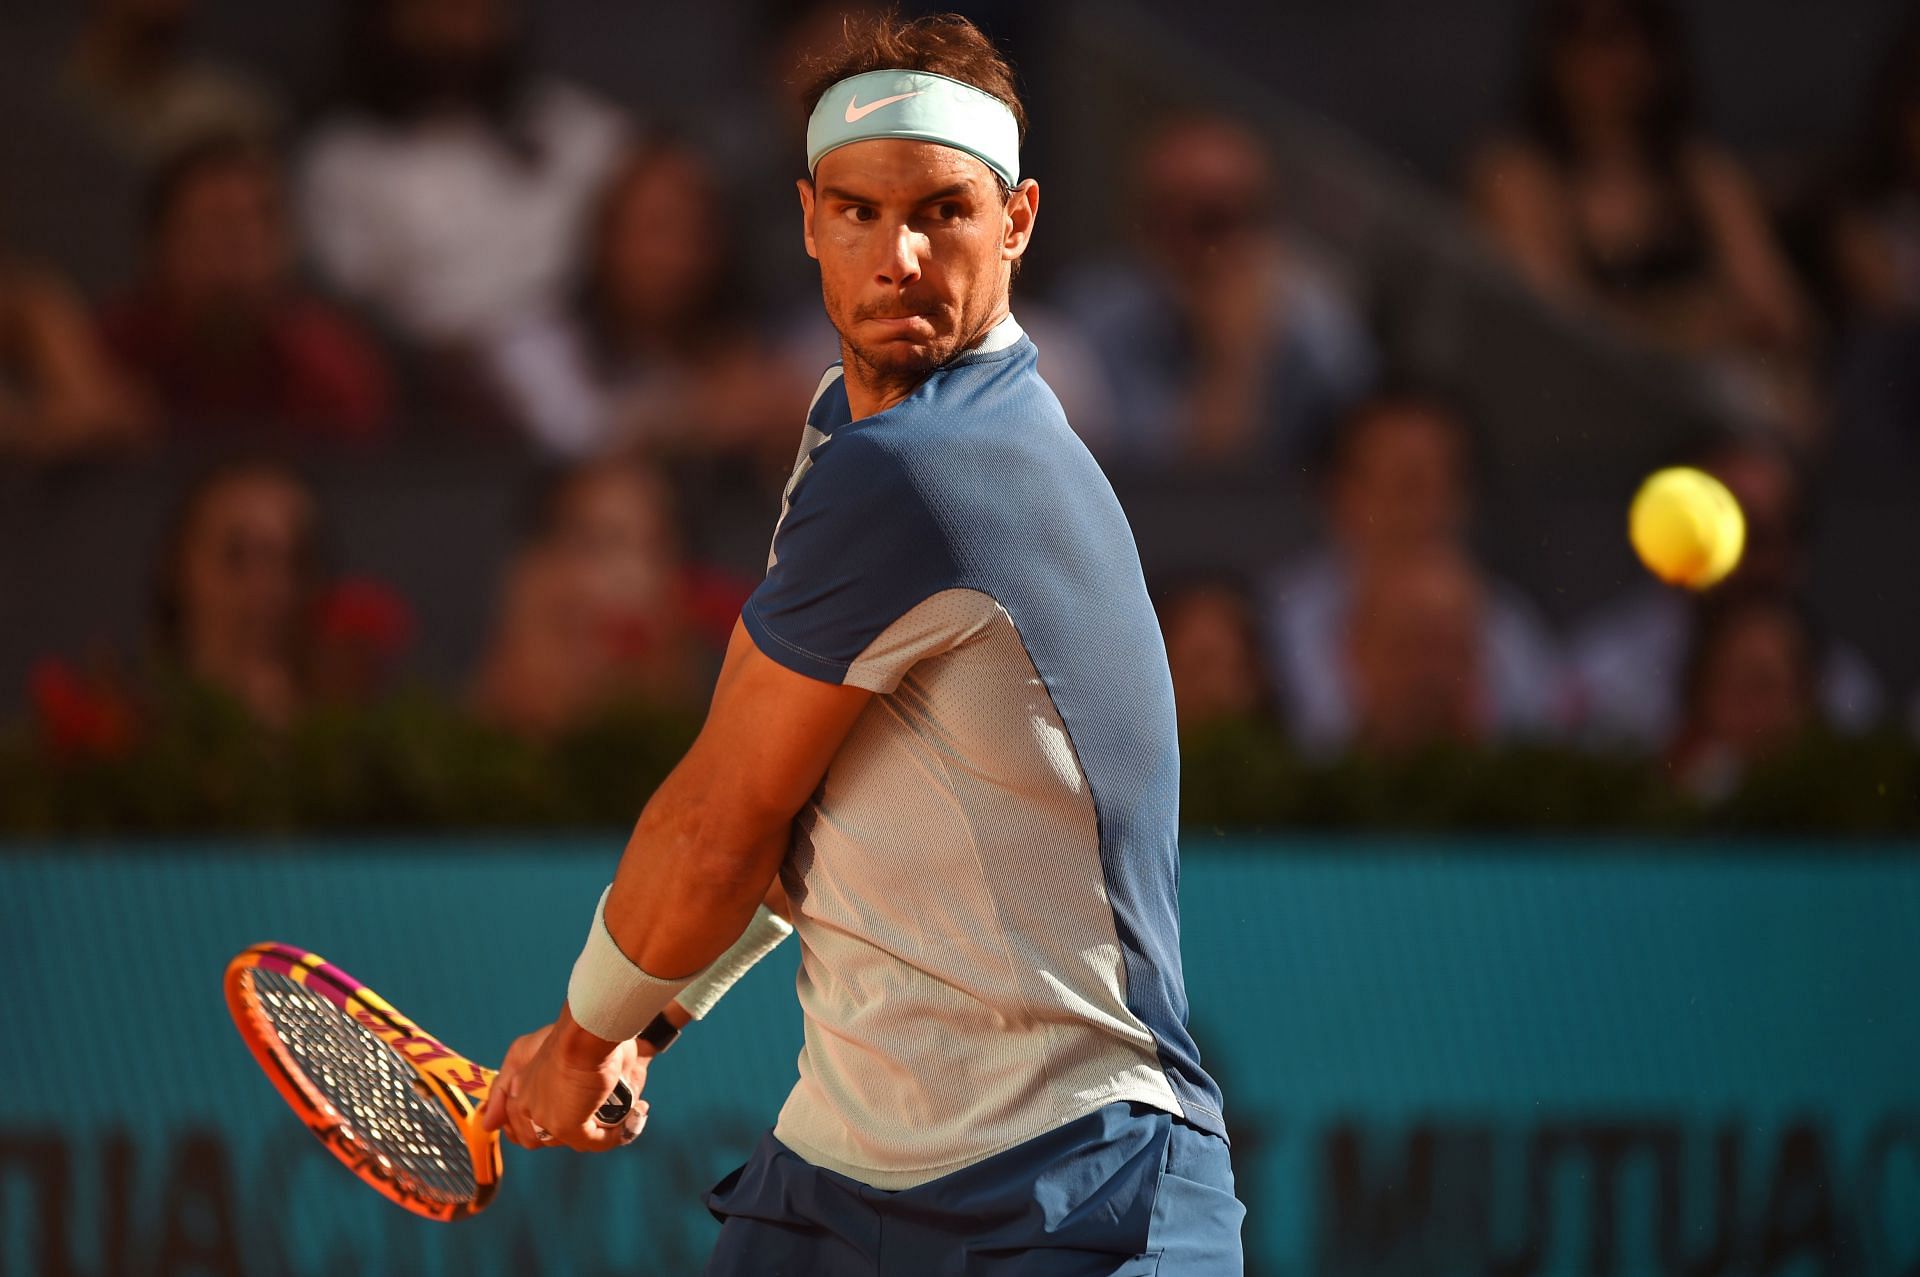 Rafael Nadal plays a backhand during the 2022 Mutua Madrid Open